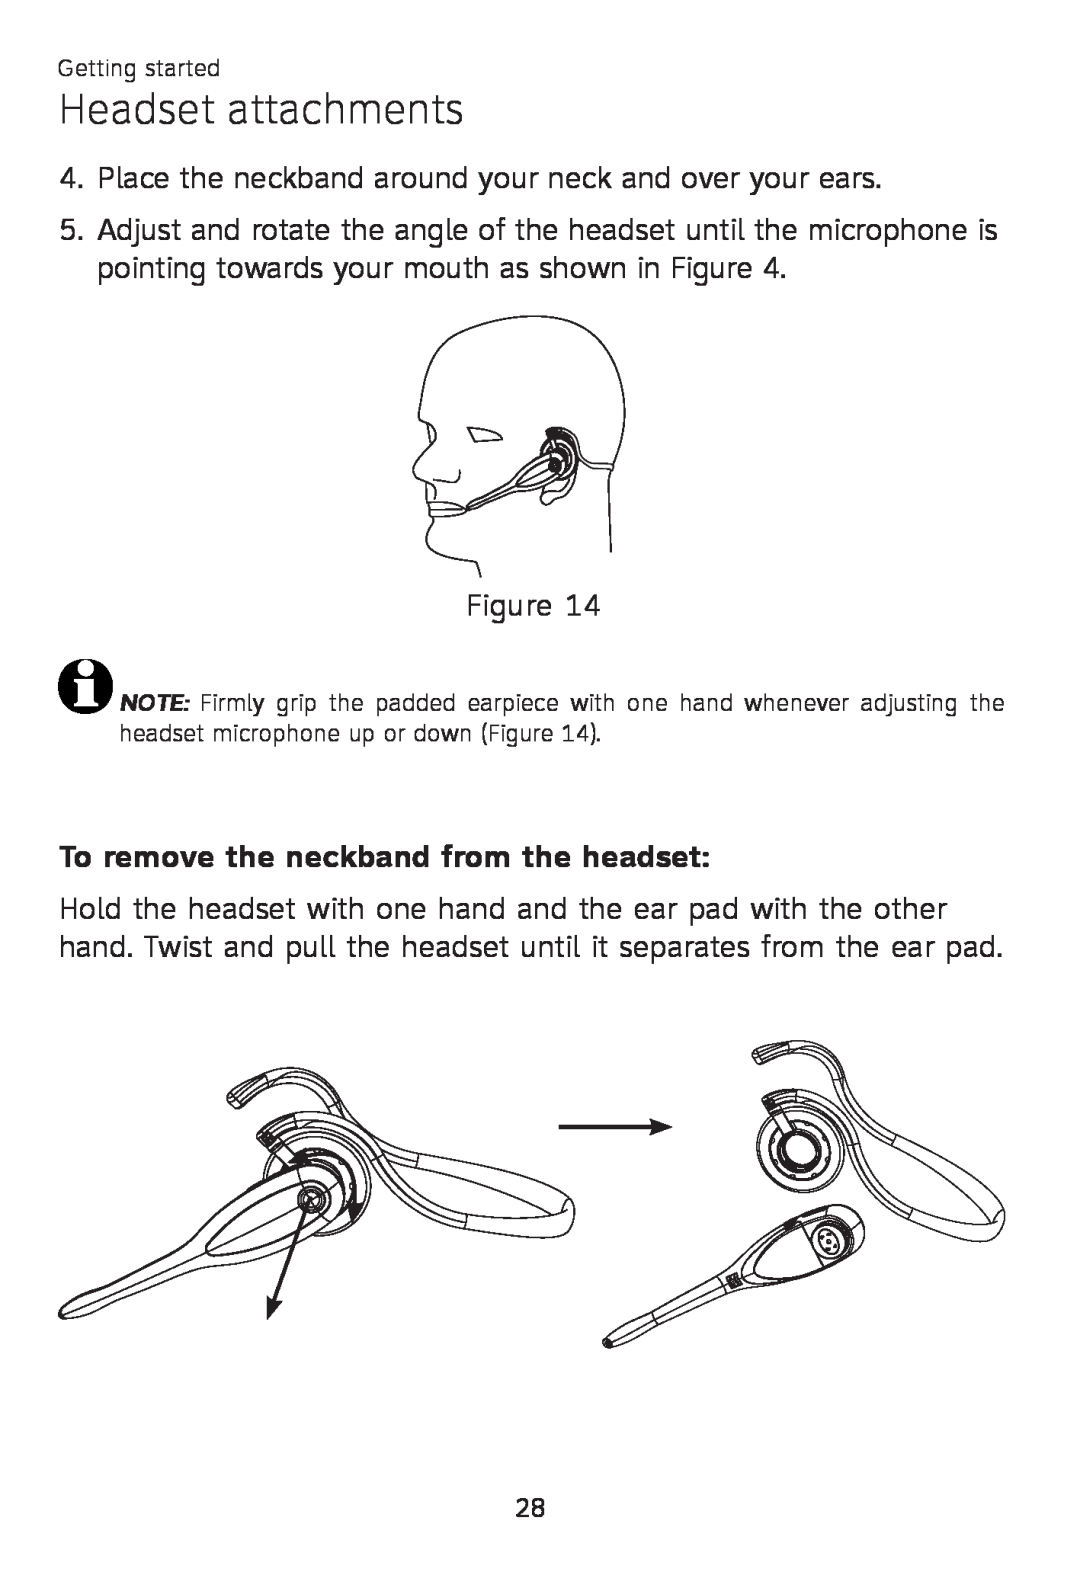 AT&T TL 7610 user manual To remove the neckband from the headset, Headset attachments 